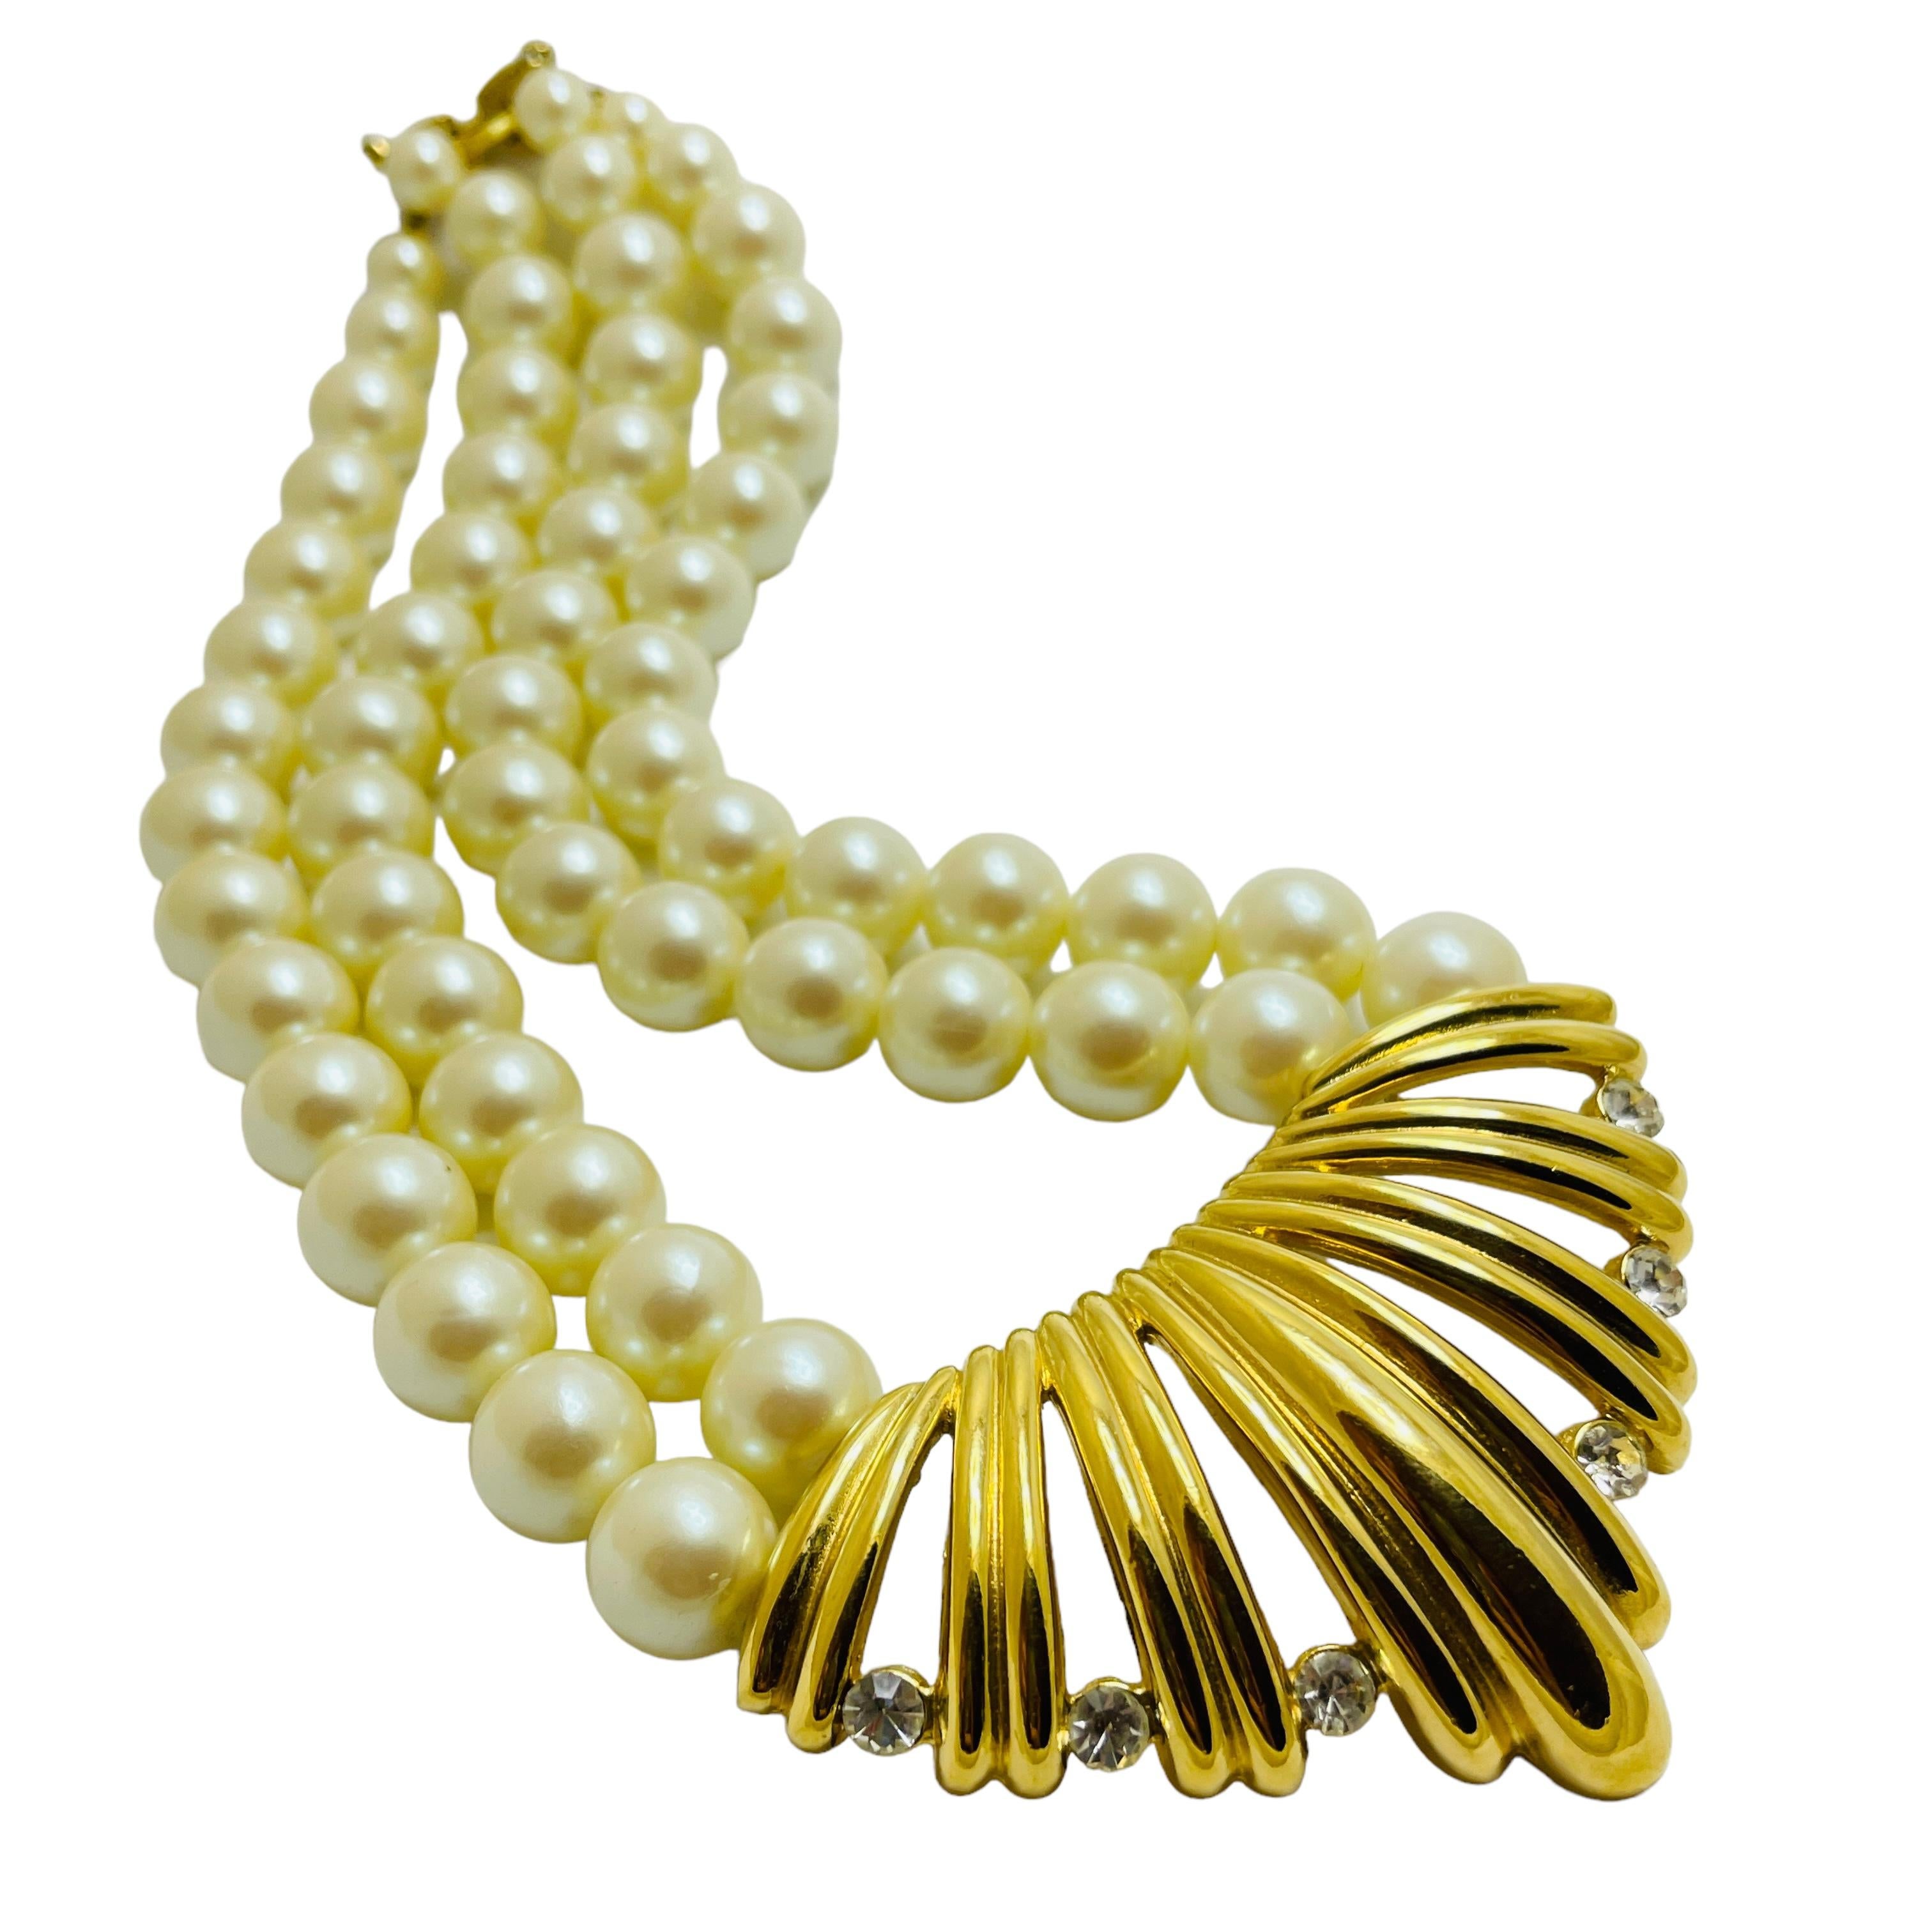 AVON vintage gold rhinestone pearls designer runway necklace In Good Condition For Sale In Palos Hills, IL